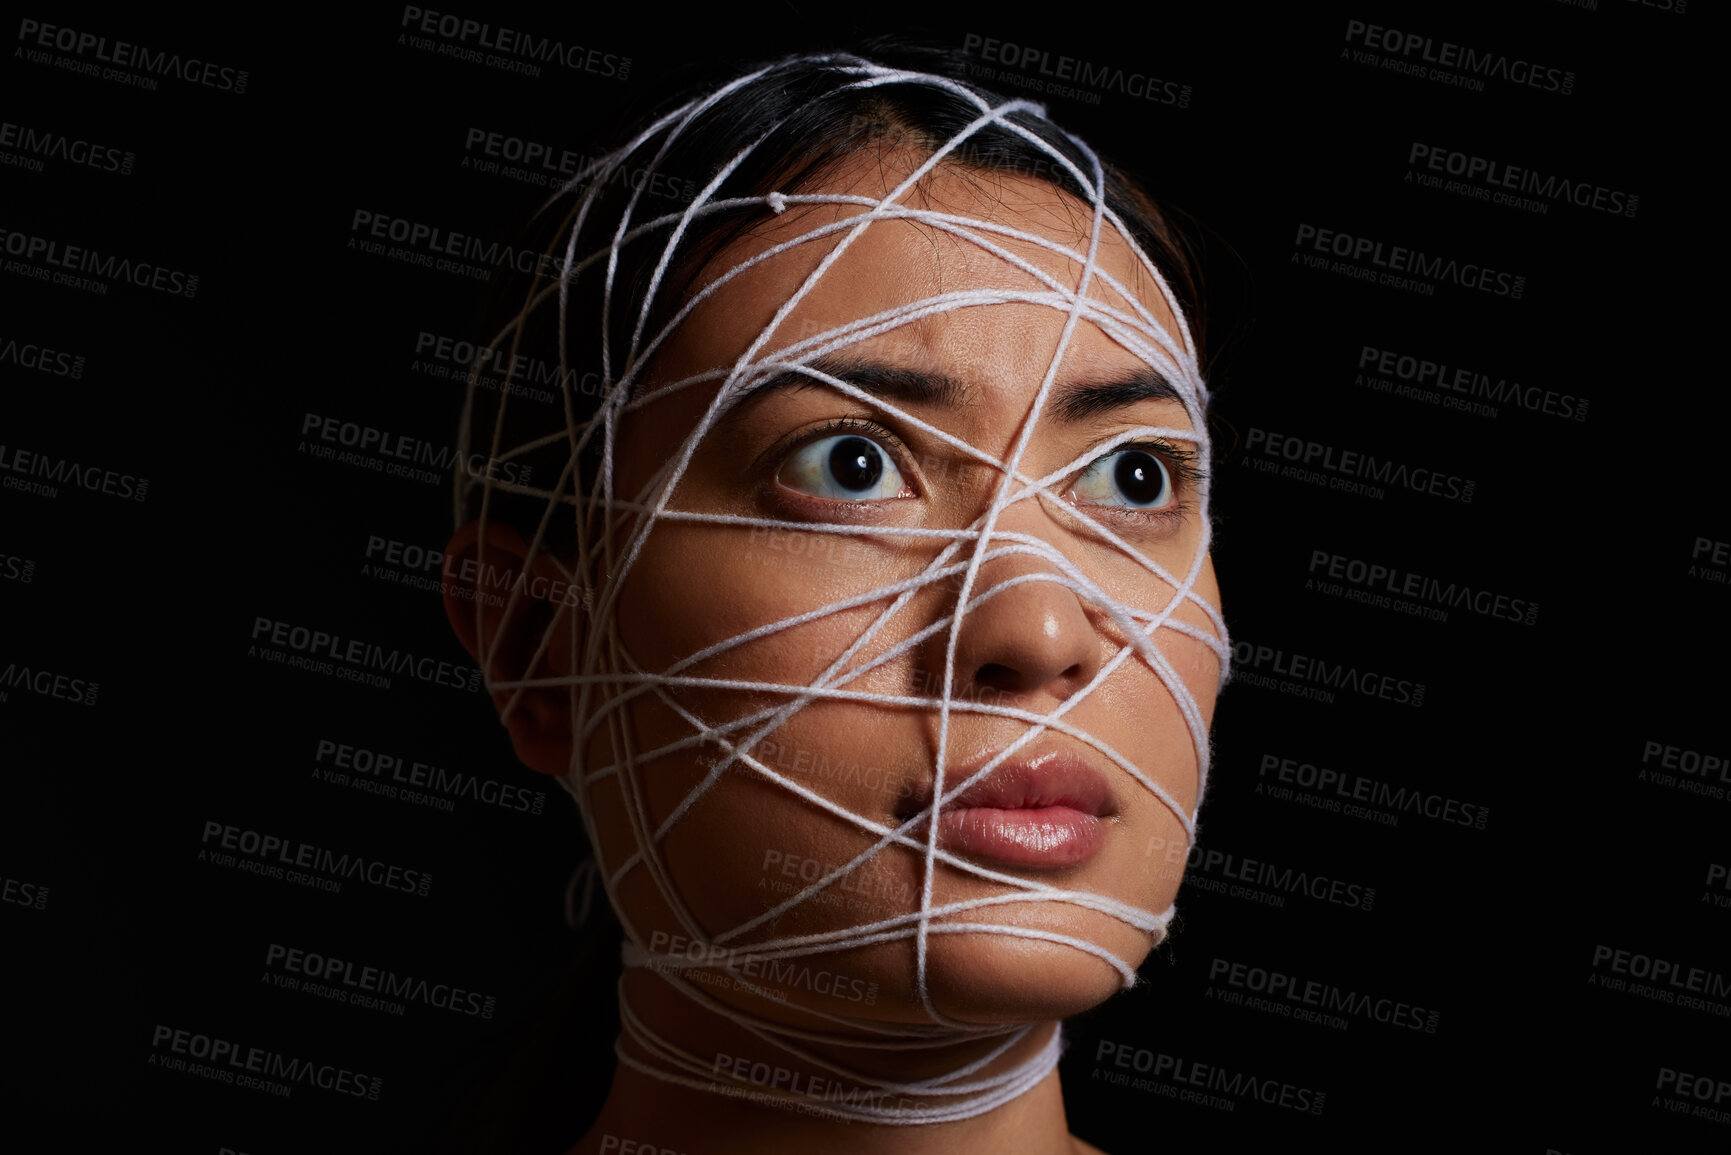 Buy stock photo Shot of a young woman wrapped in string against a dark background